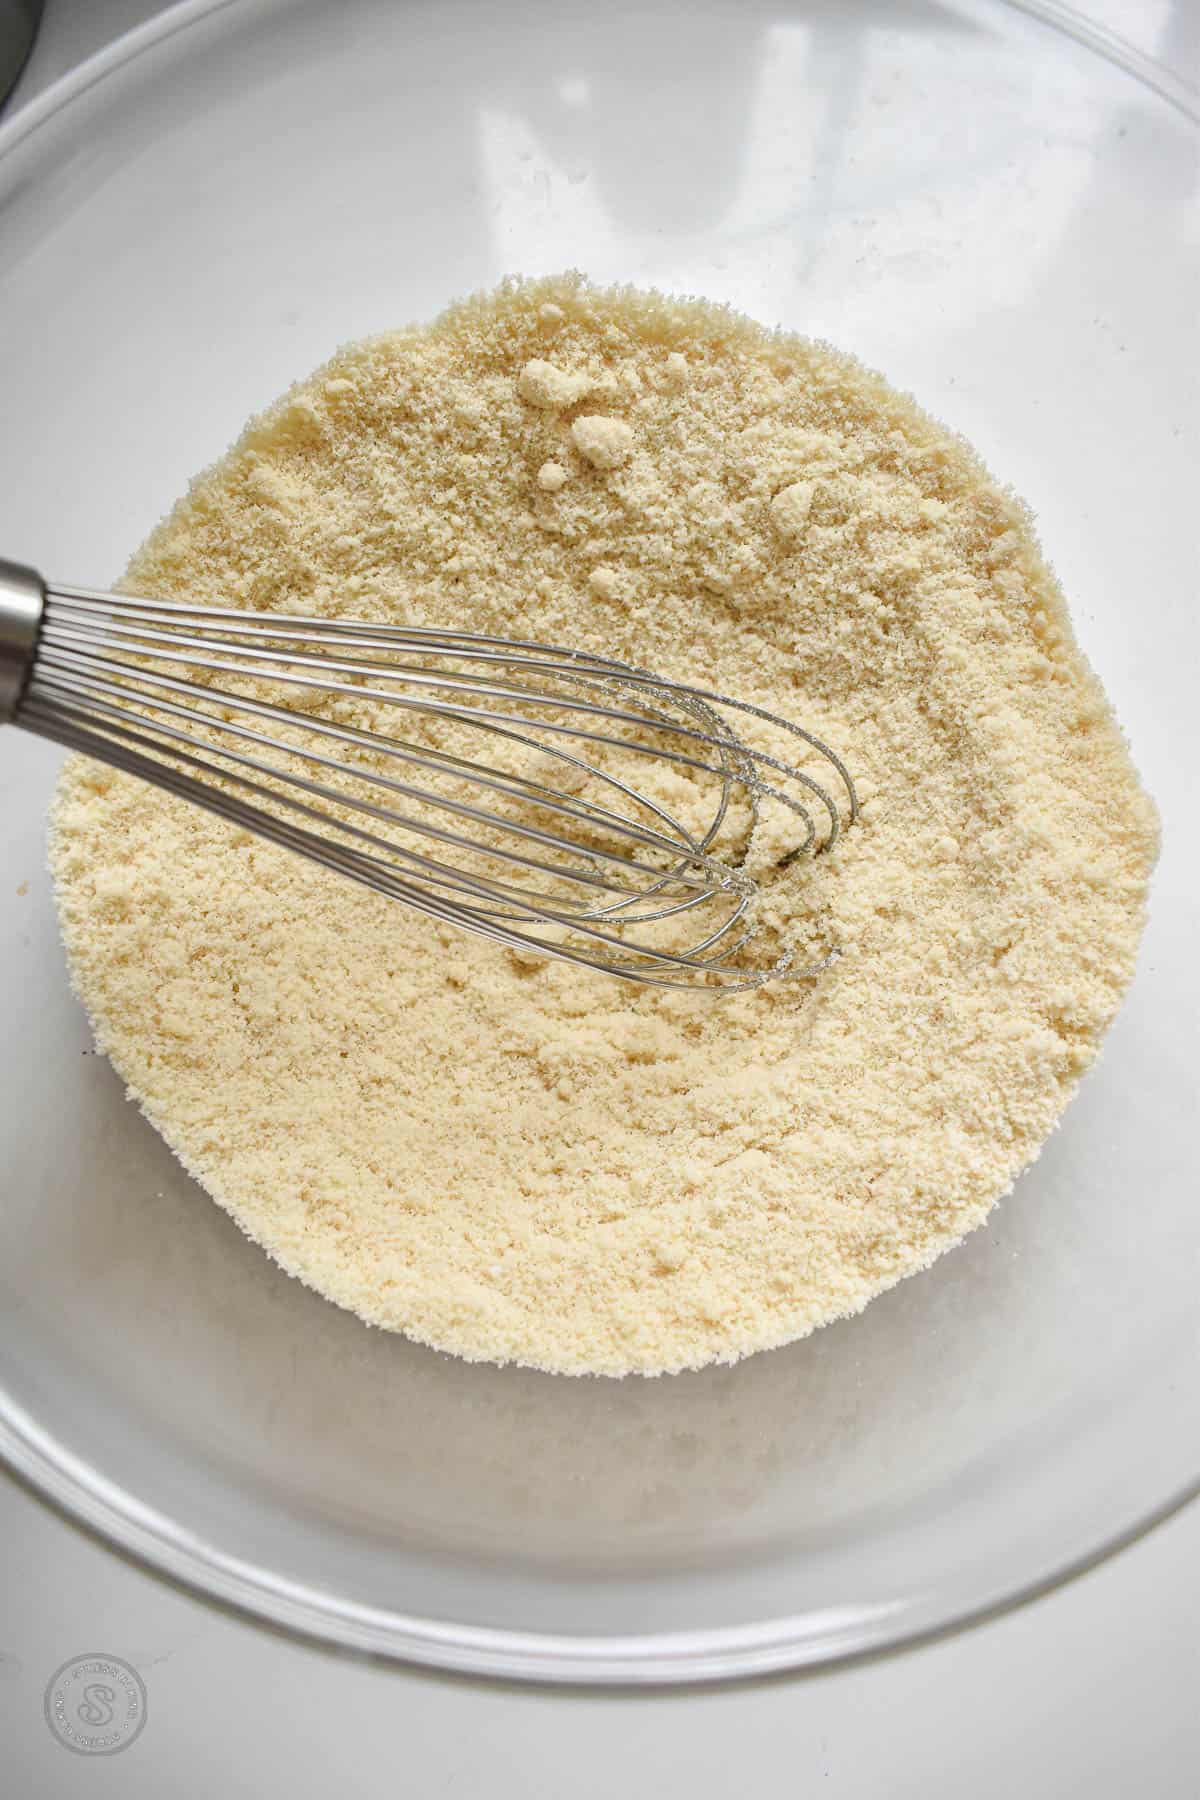 Almond flour mixture with a whisk in a clear mixing bowl